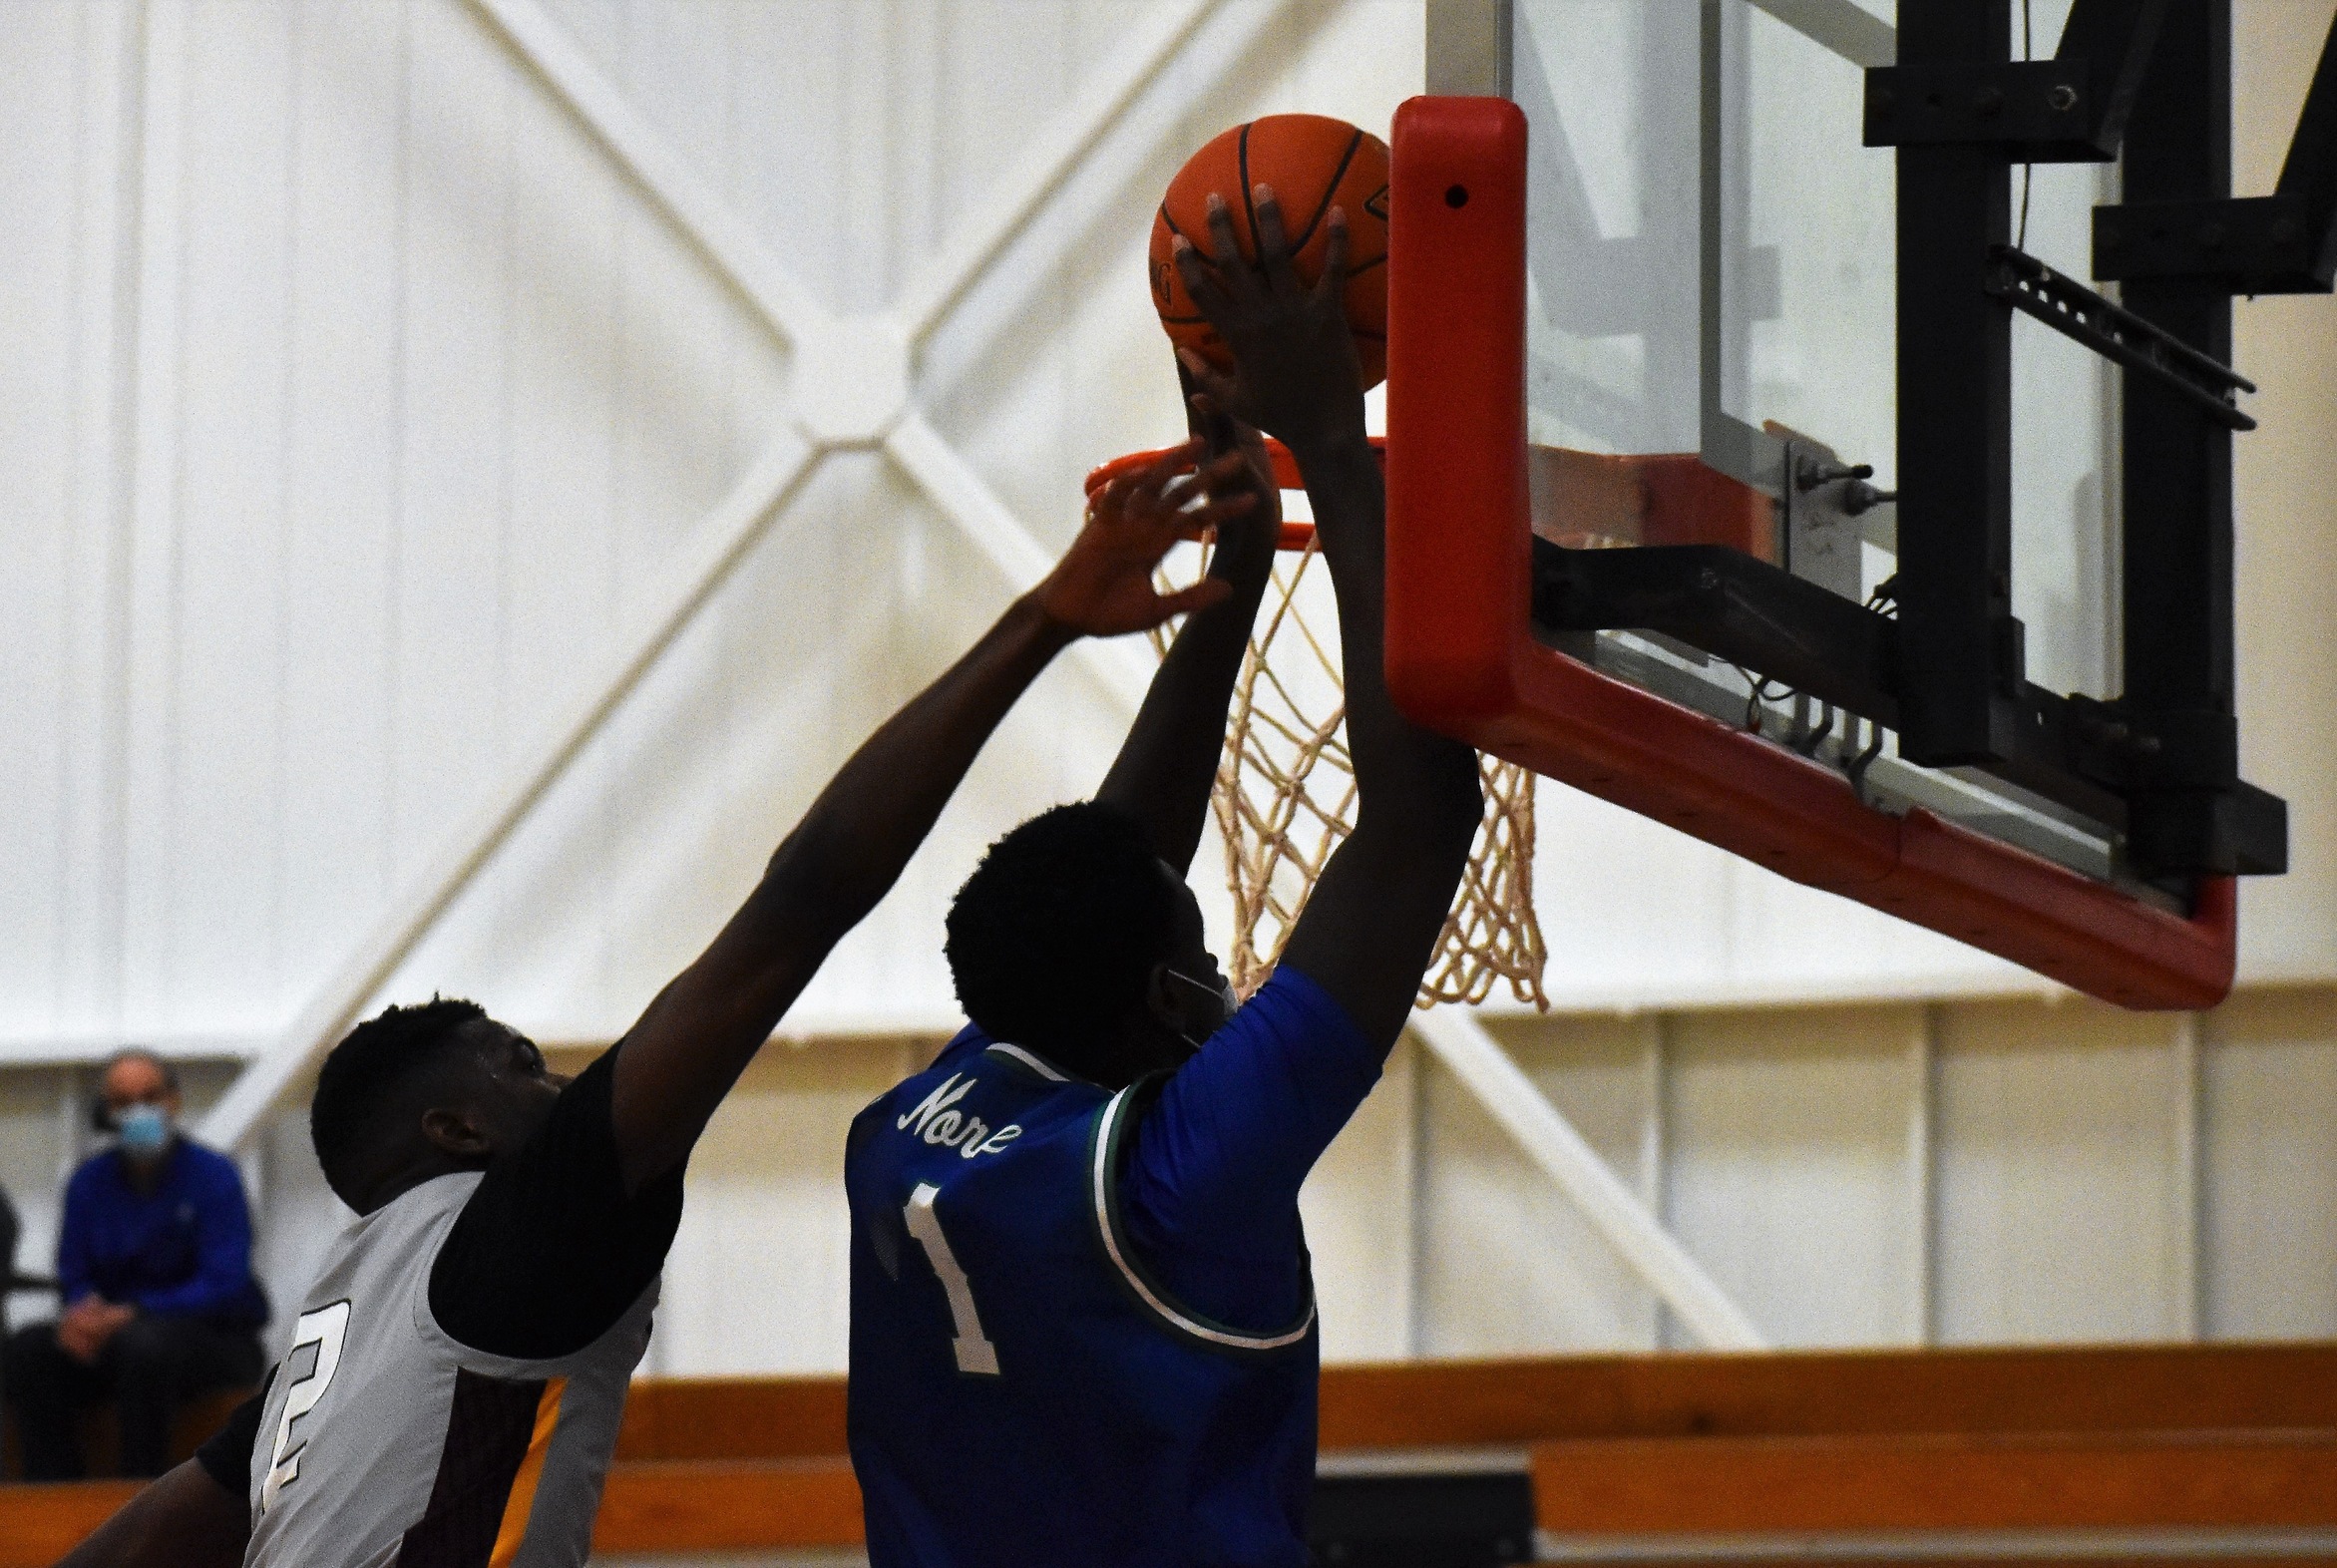 Jibril Ndiaye going up for a dunk as a defender reaches from behind him